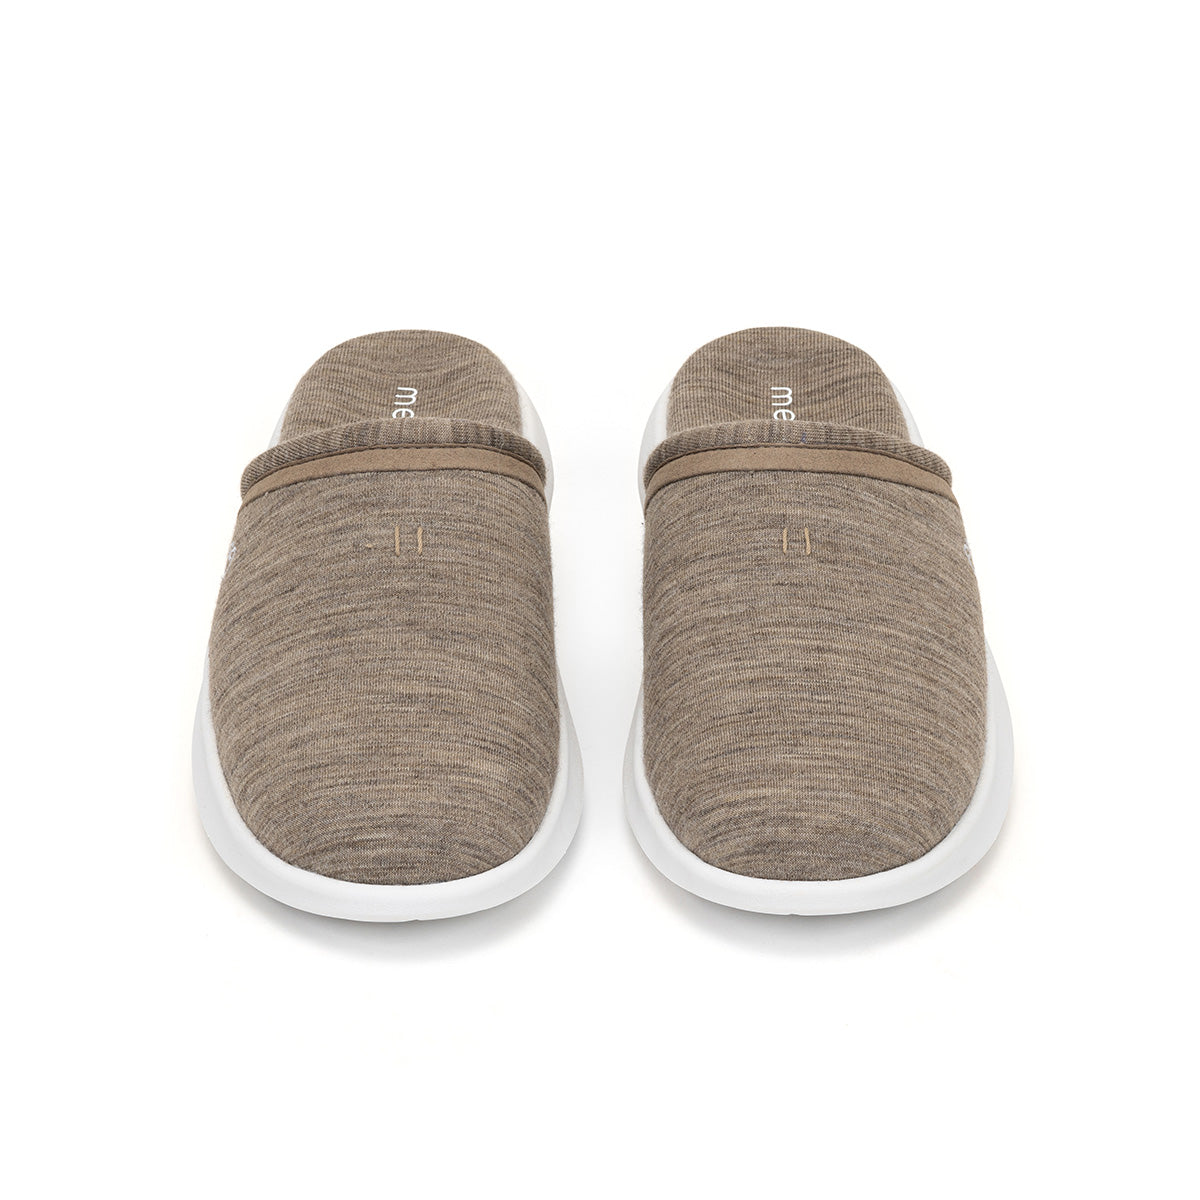 Women's Mules Sand - Special Offer